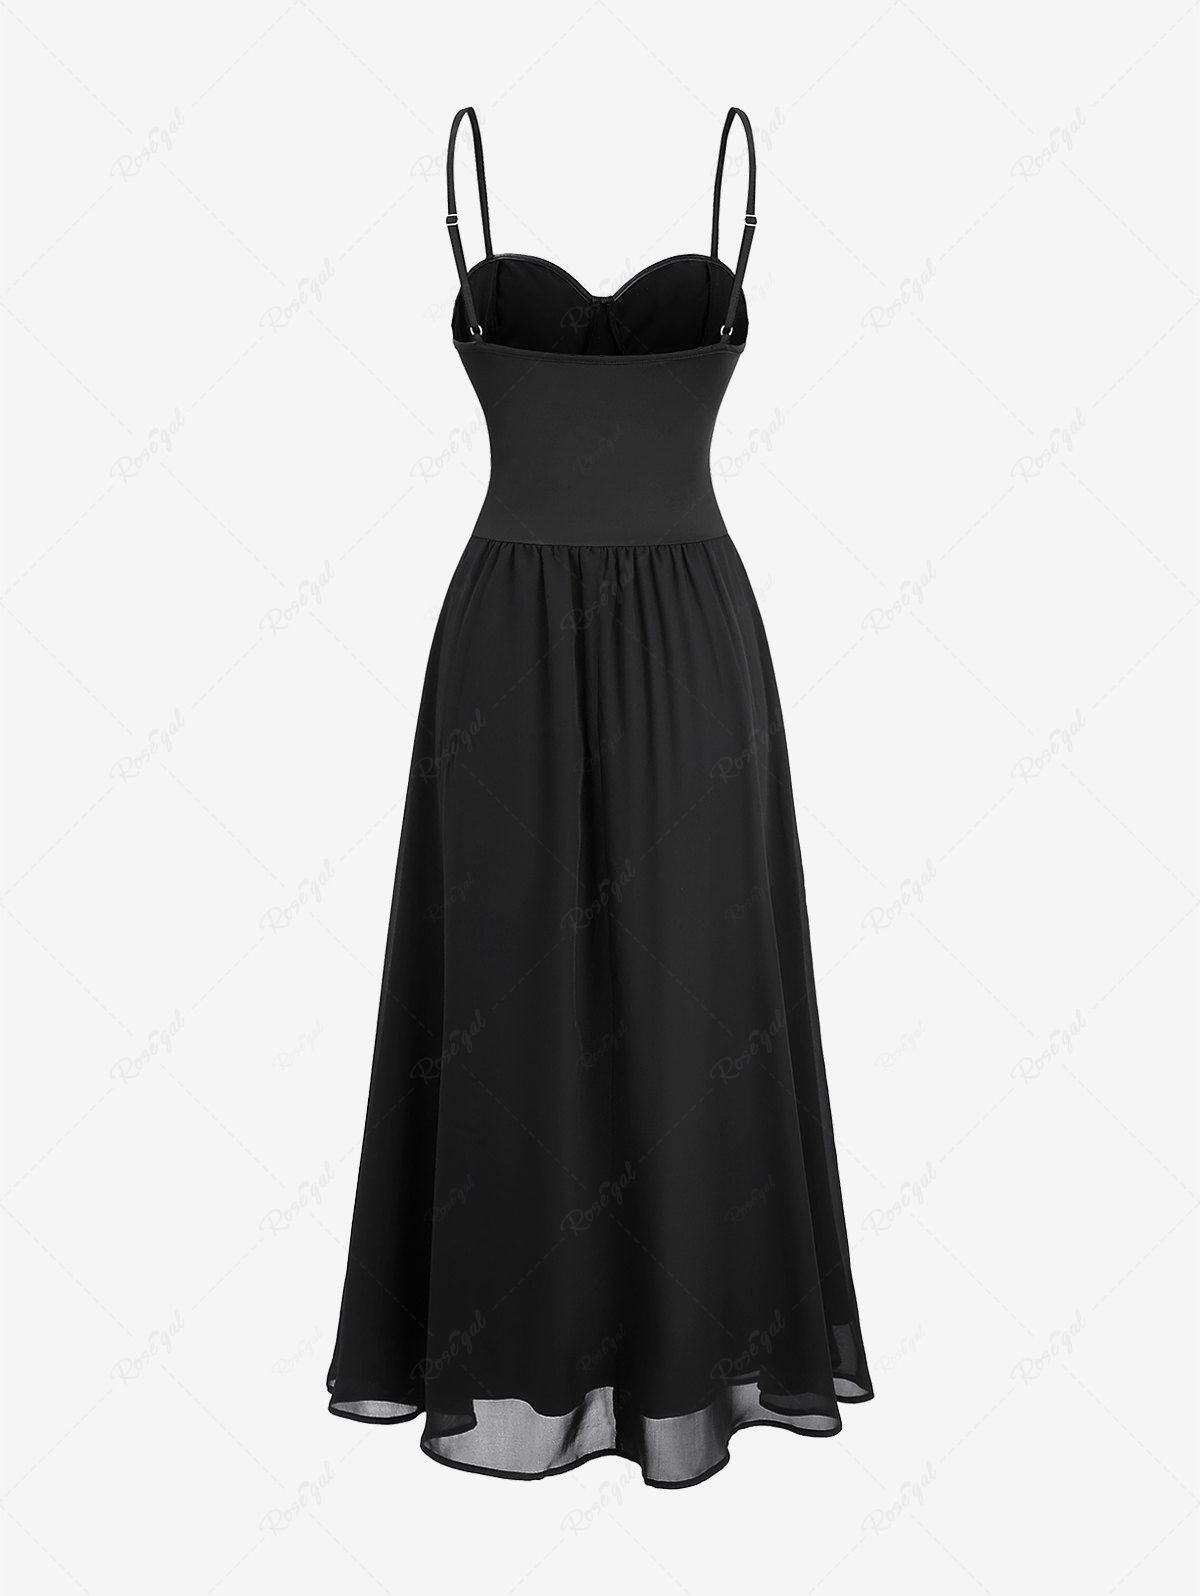 Gothic PU Panel Buckle Grommet Patchwork Chiffon Backless A Line Cami Dress